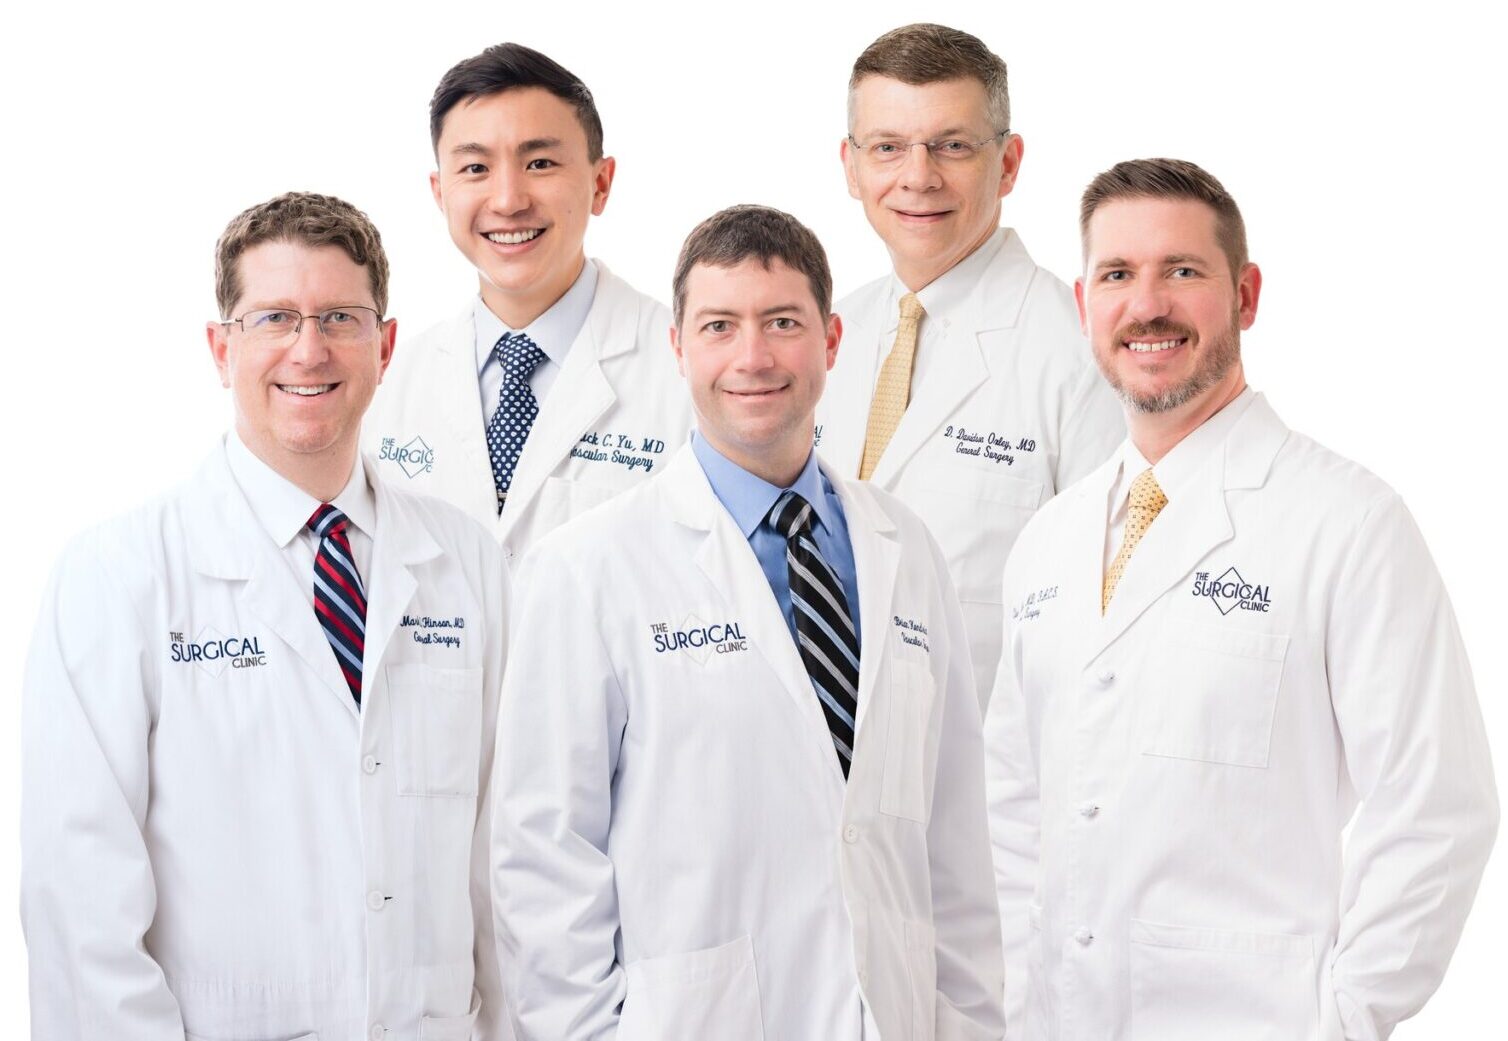 who is the best general surgeon and vein doctor near me in columbia tn